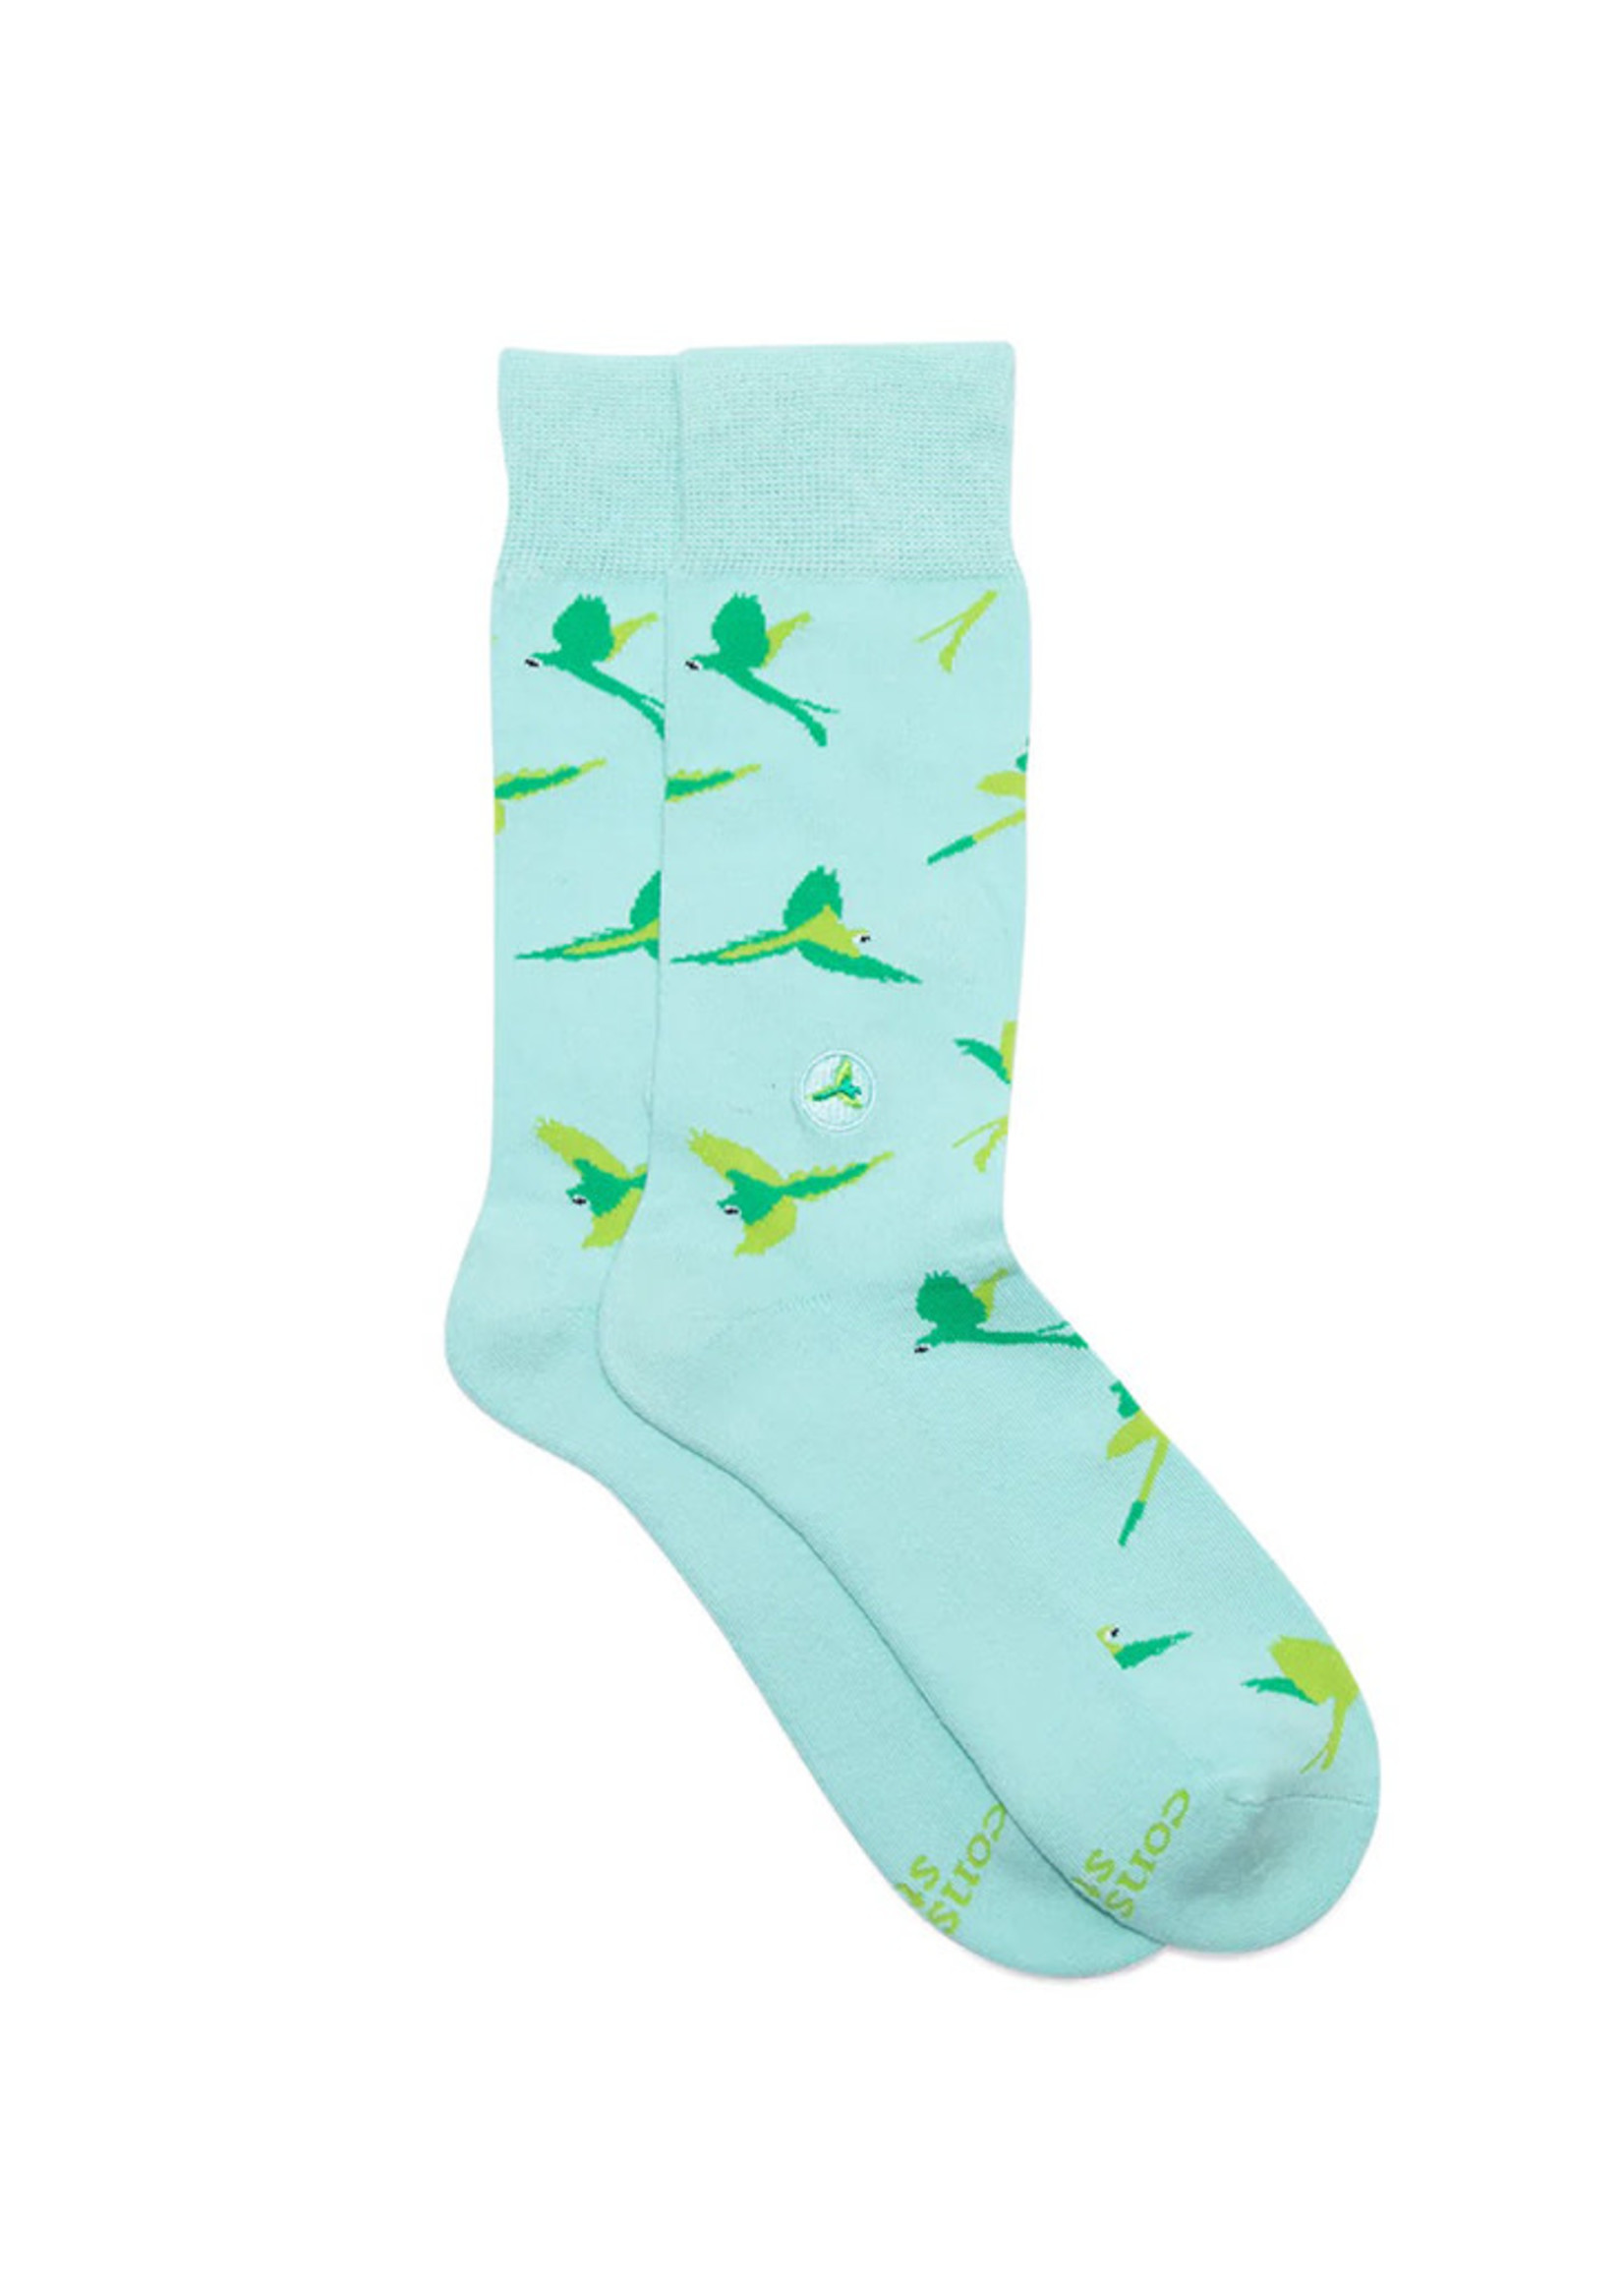 Conscious Step Men's Socks That Protect Macaws